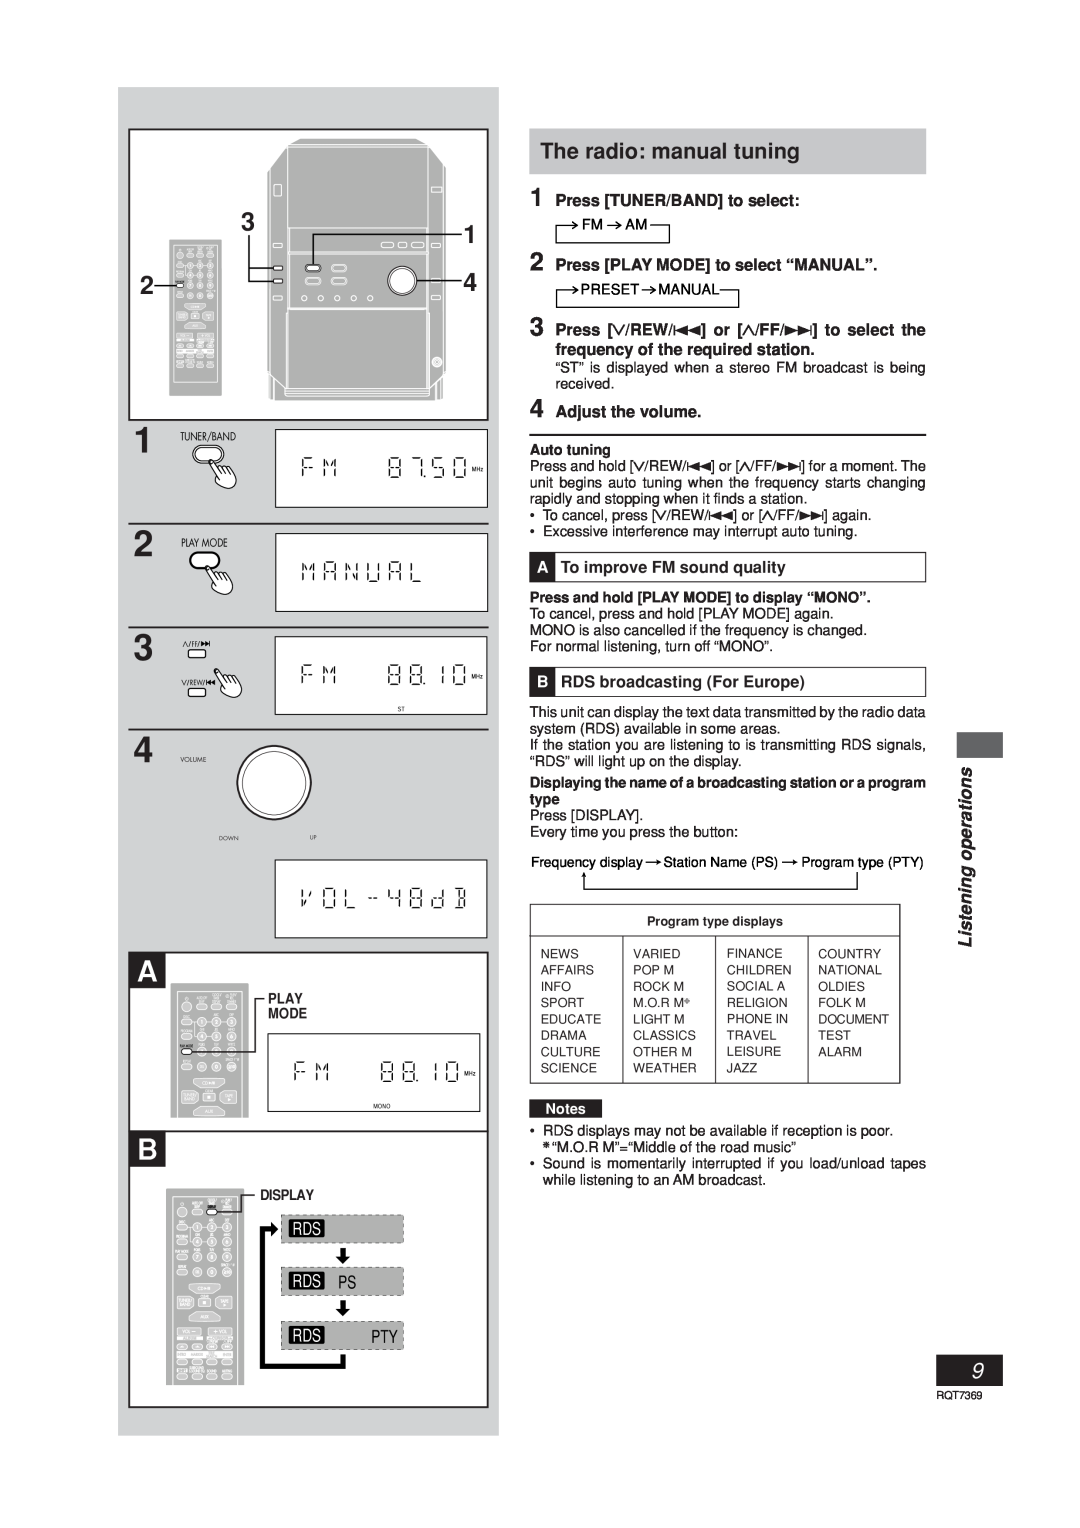 Panasonic SCPM19 The radio manual tuning, Listening, Press TUNER/BAND to select, Press PLAY MODE to select “MANUAL” 